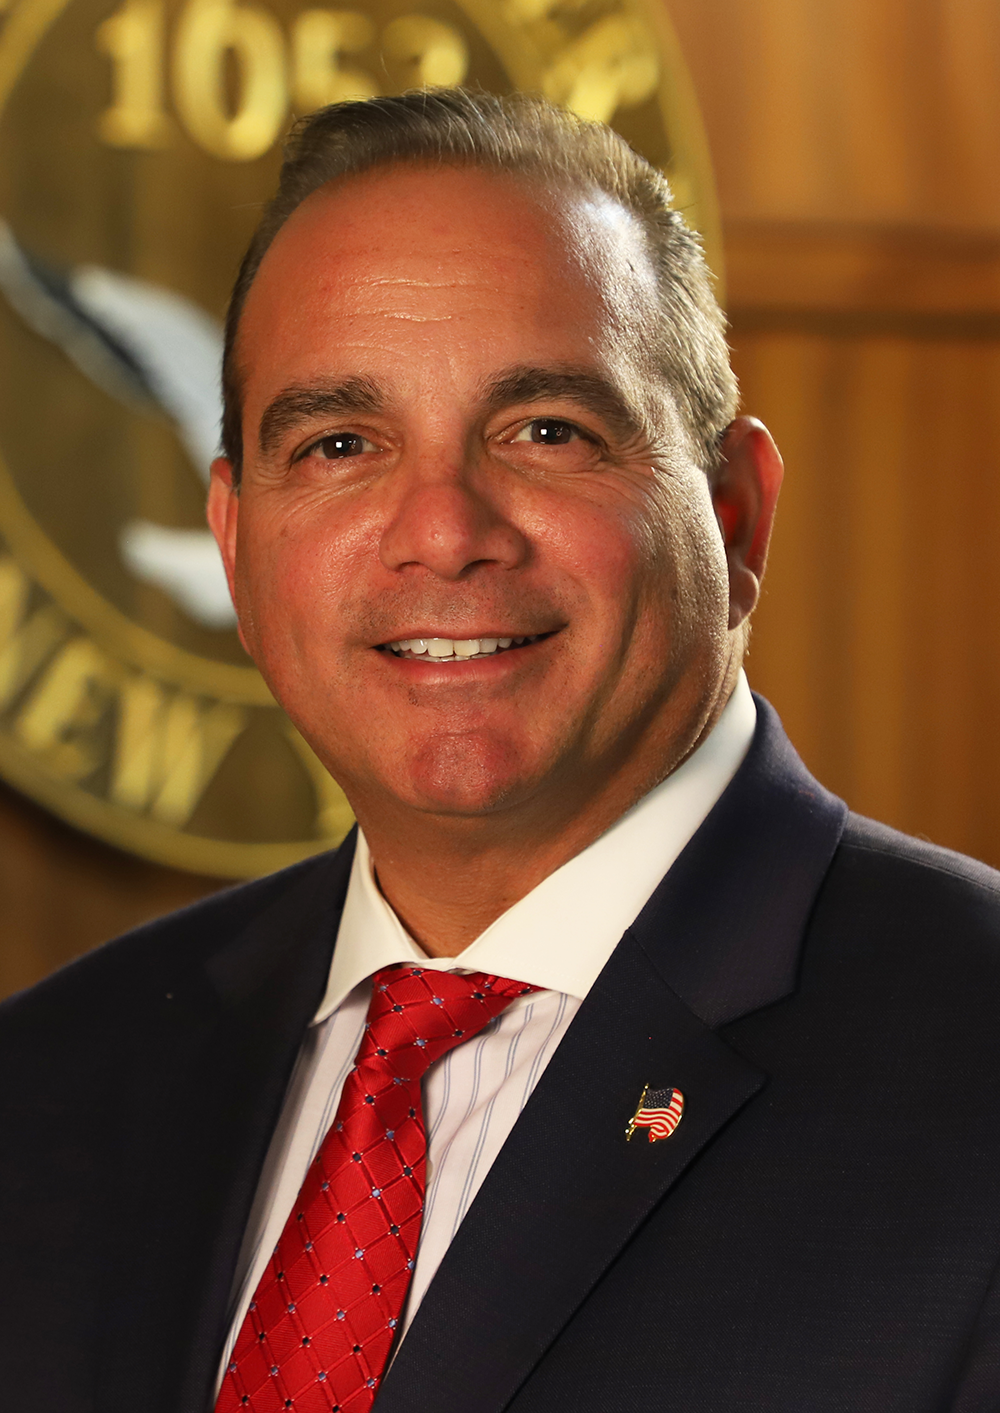 Councilman Labriola – Town of Oyster Bay